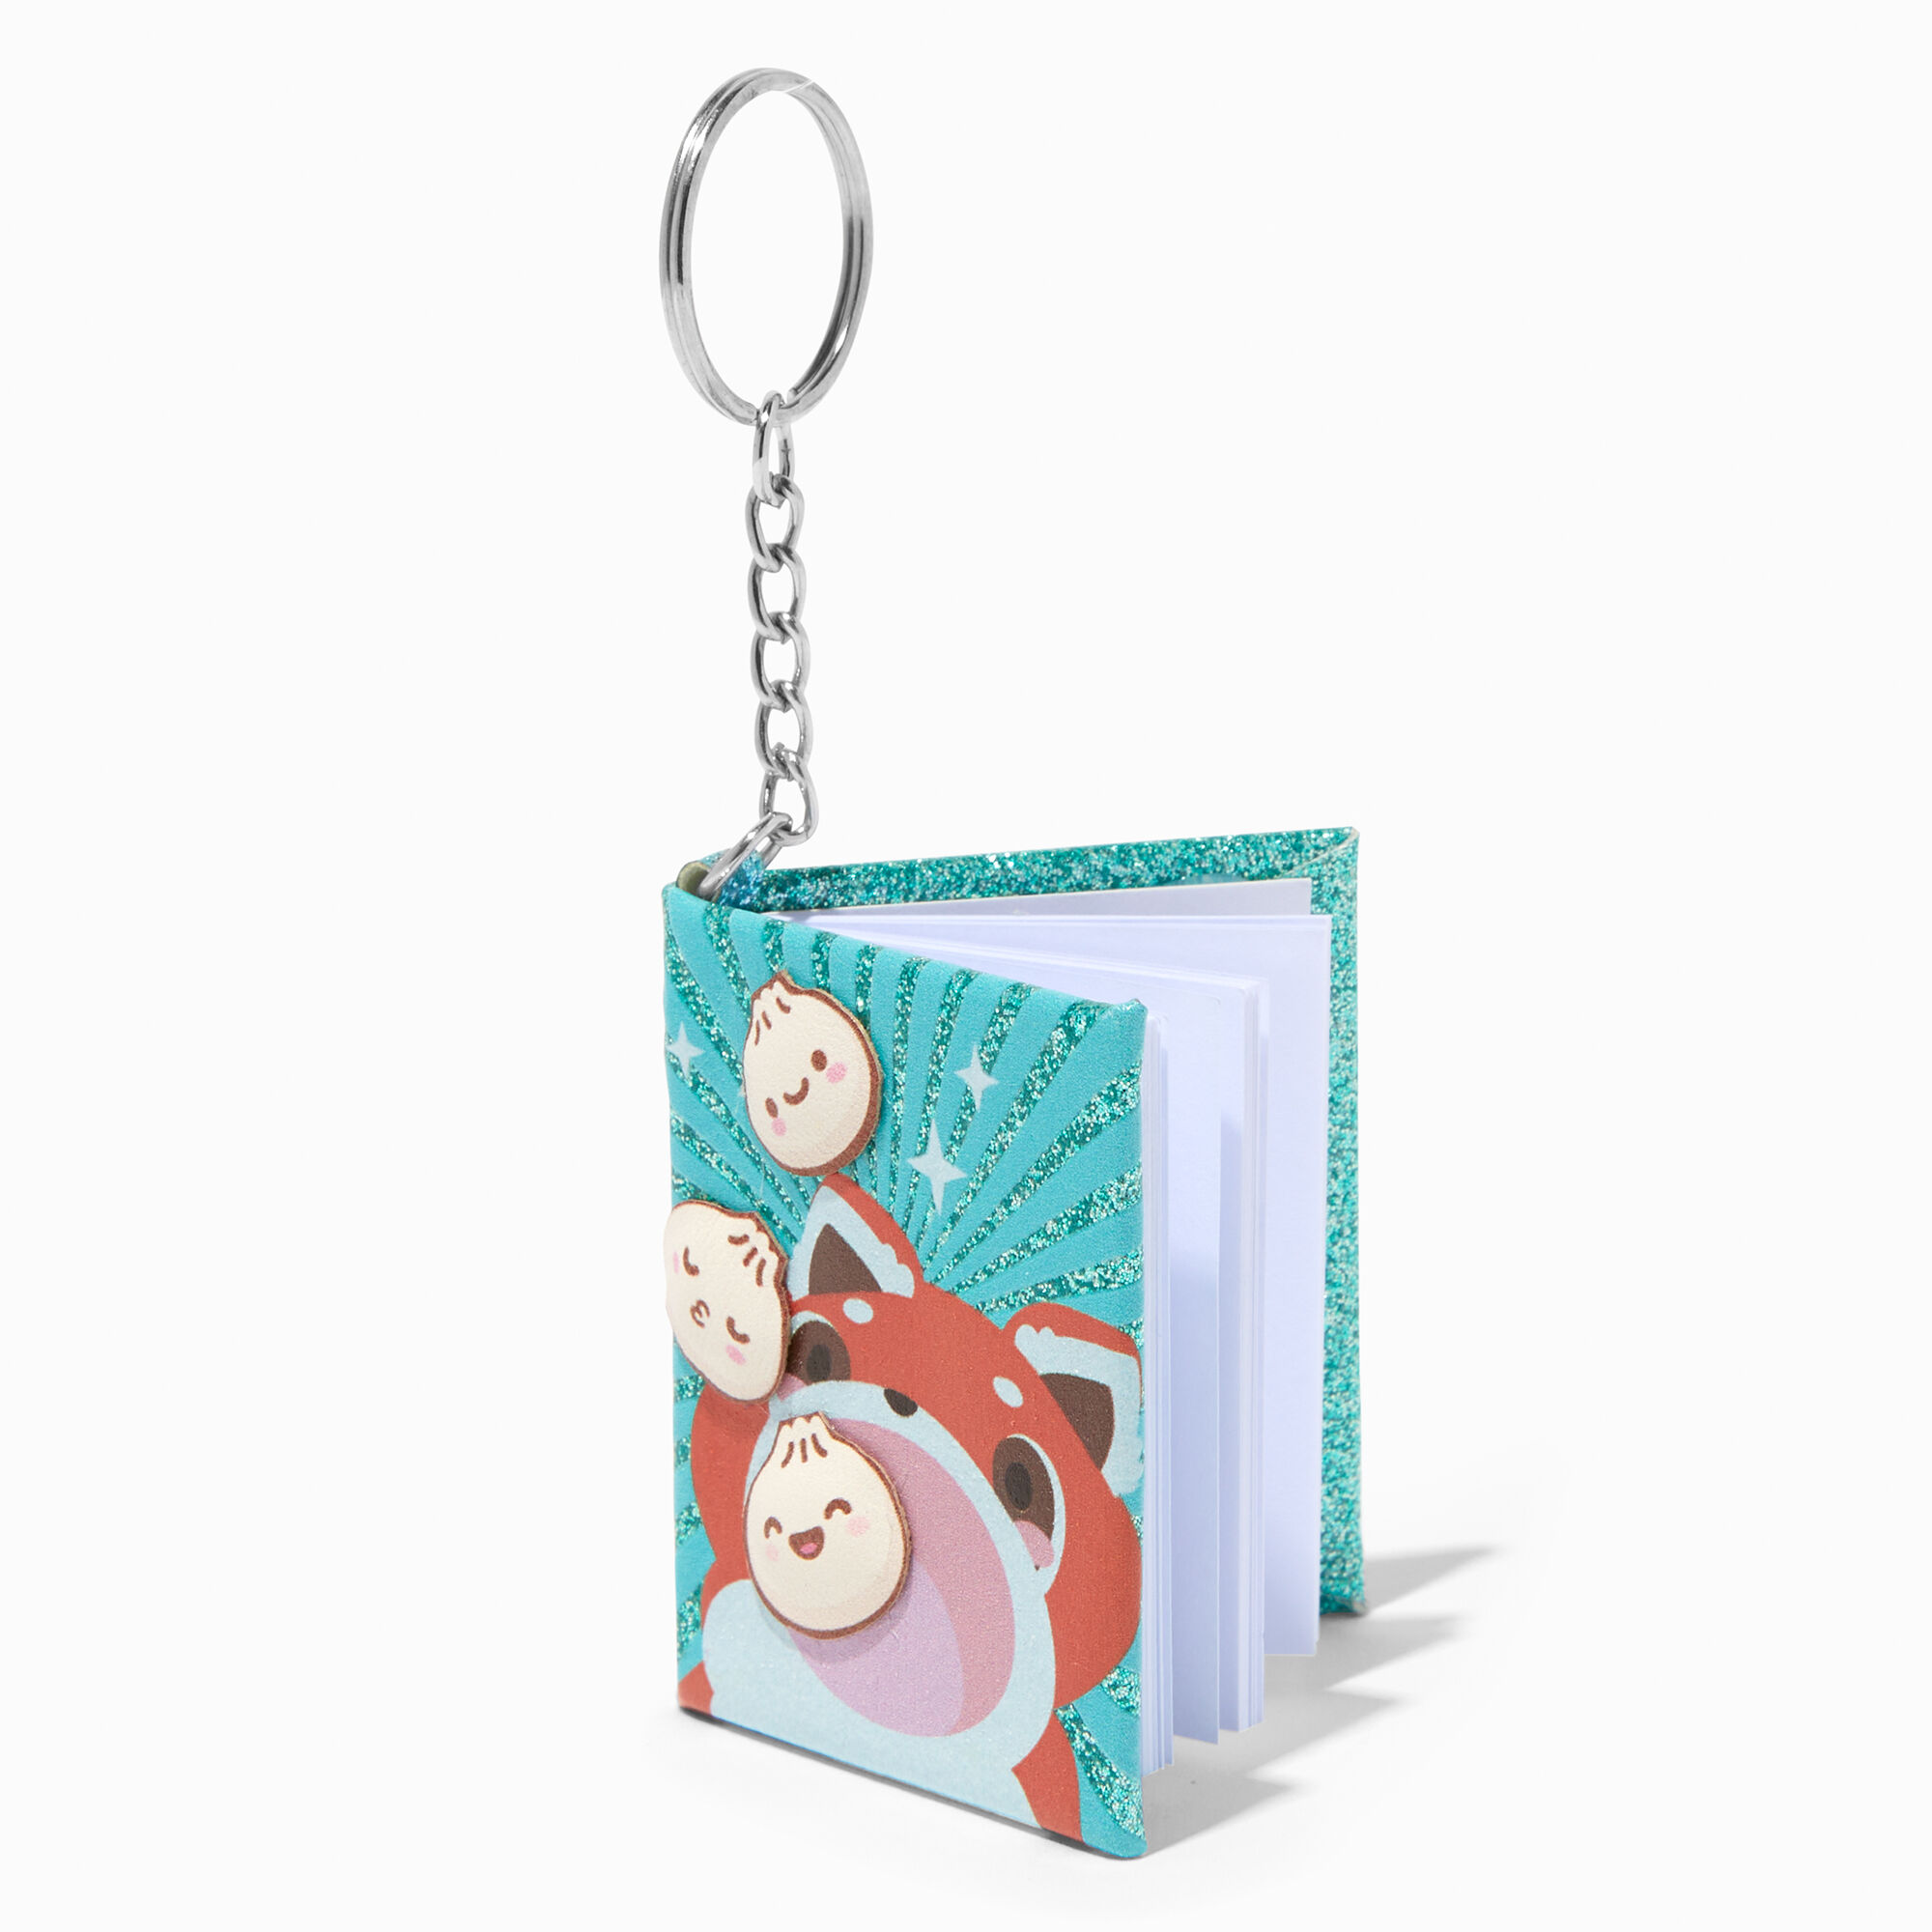 View Claires Panda Mini Glitter Diary Keychain Red information